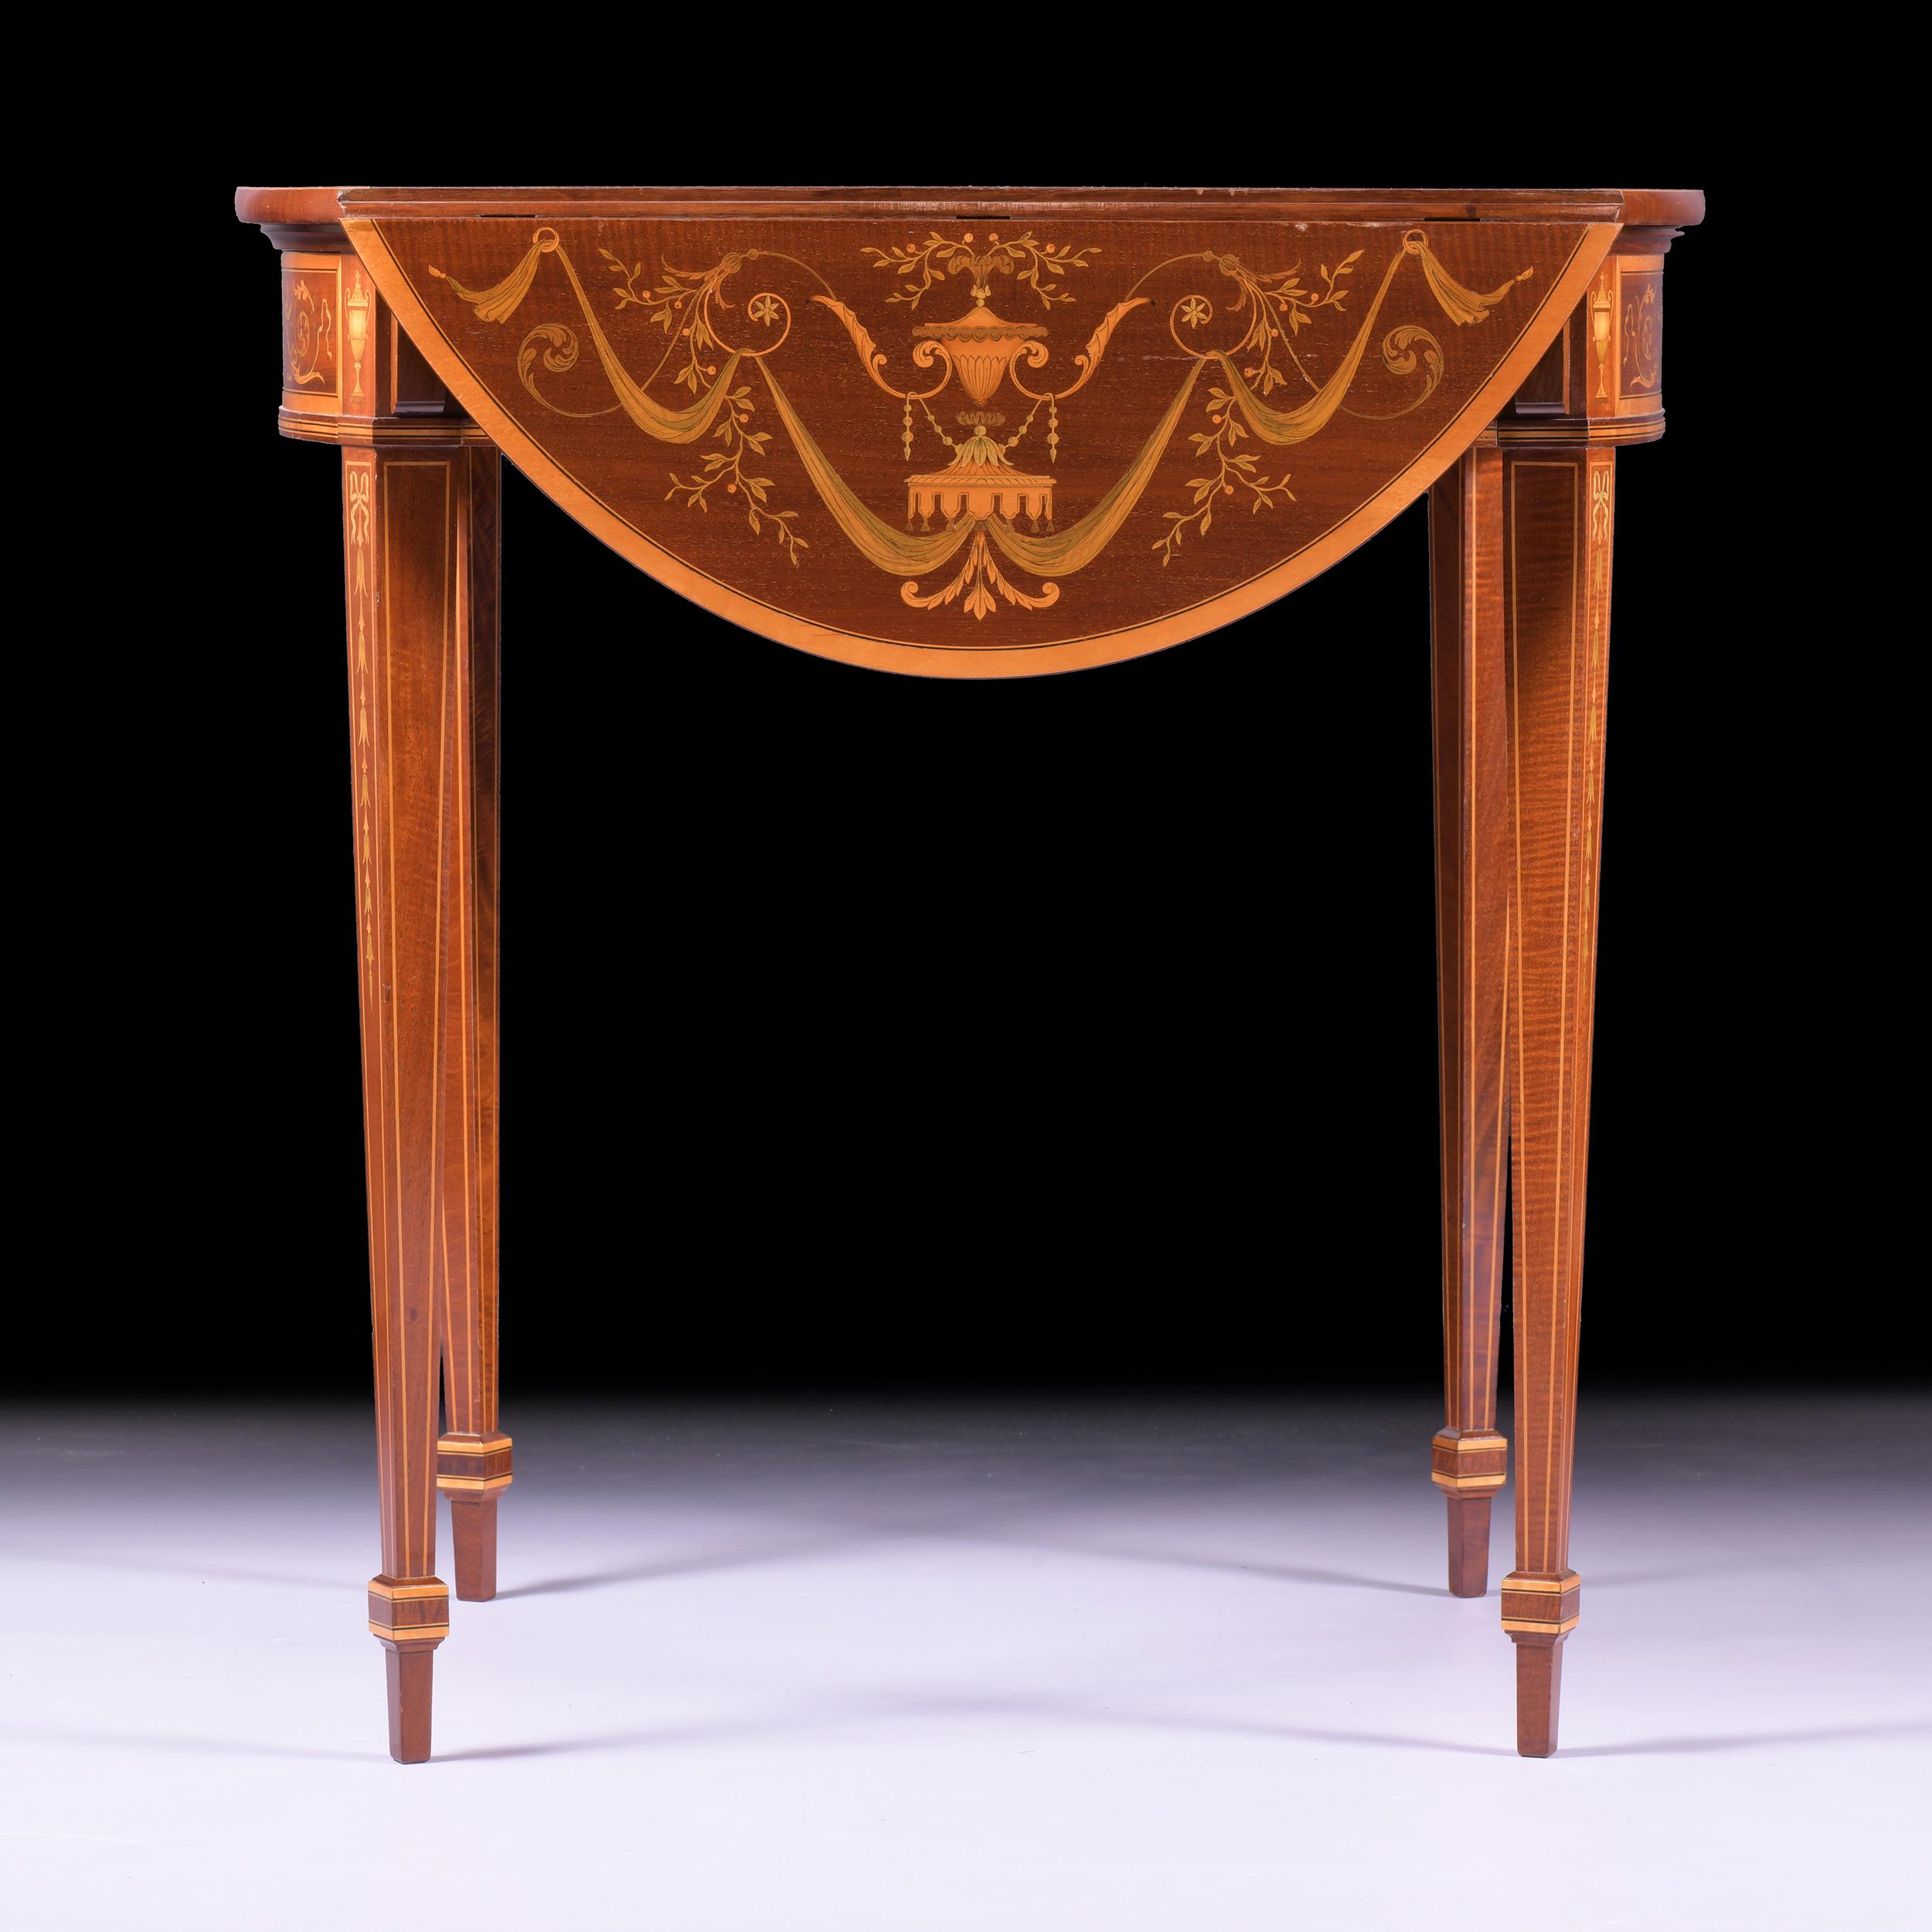 Late 19th Century English Edwardian Satinwood Pembroke Table By Edwards & Robert For Sale 2